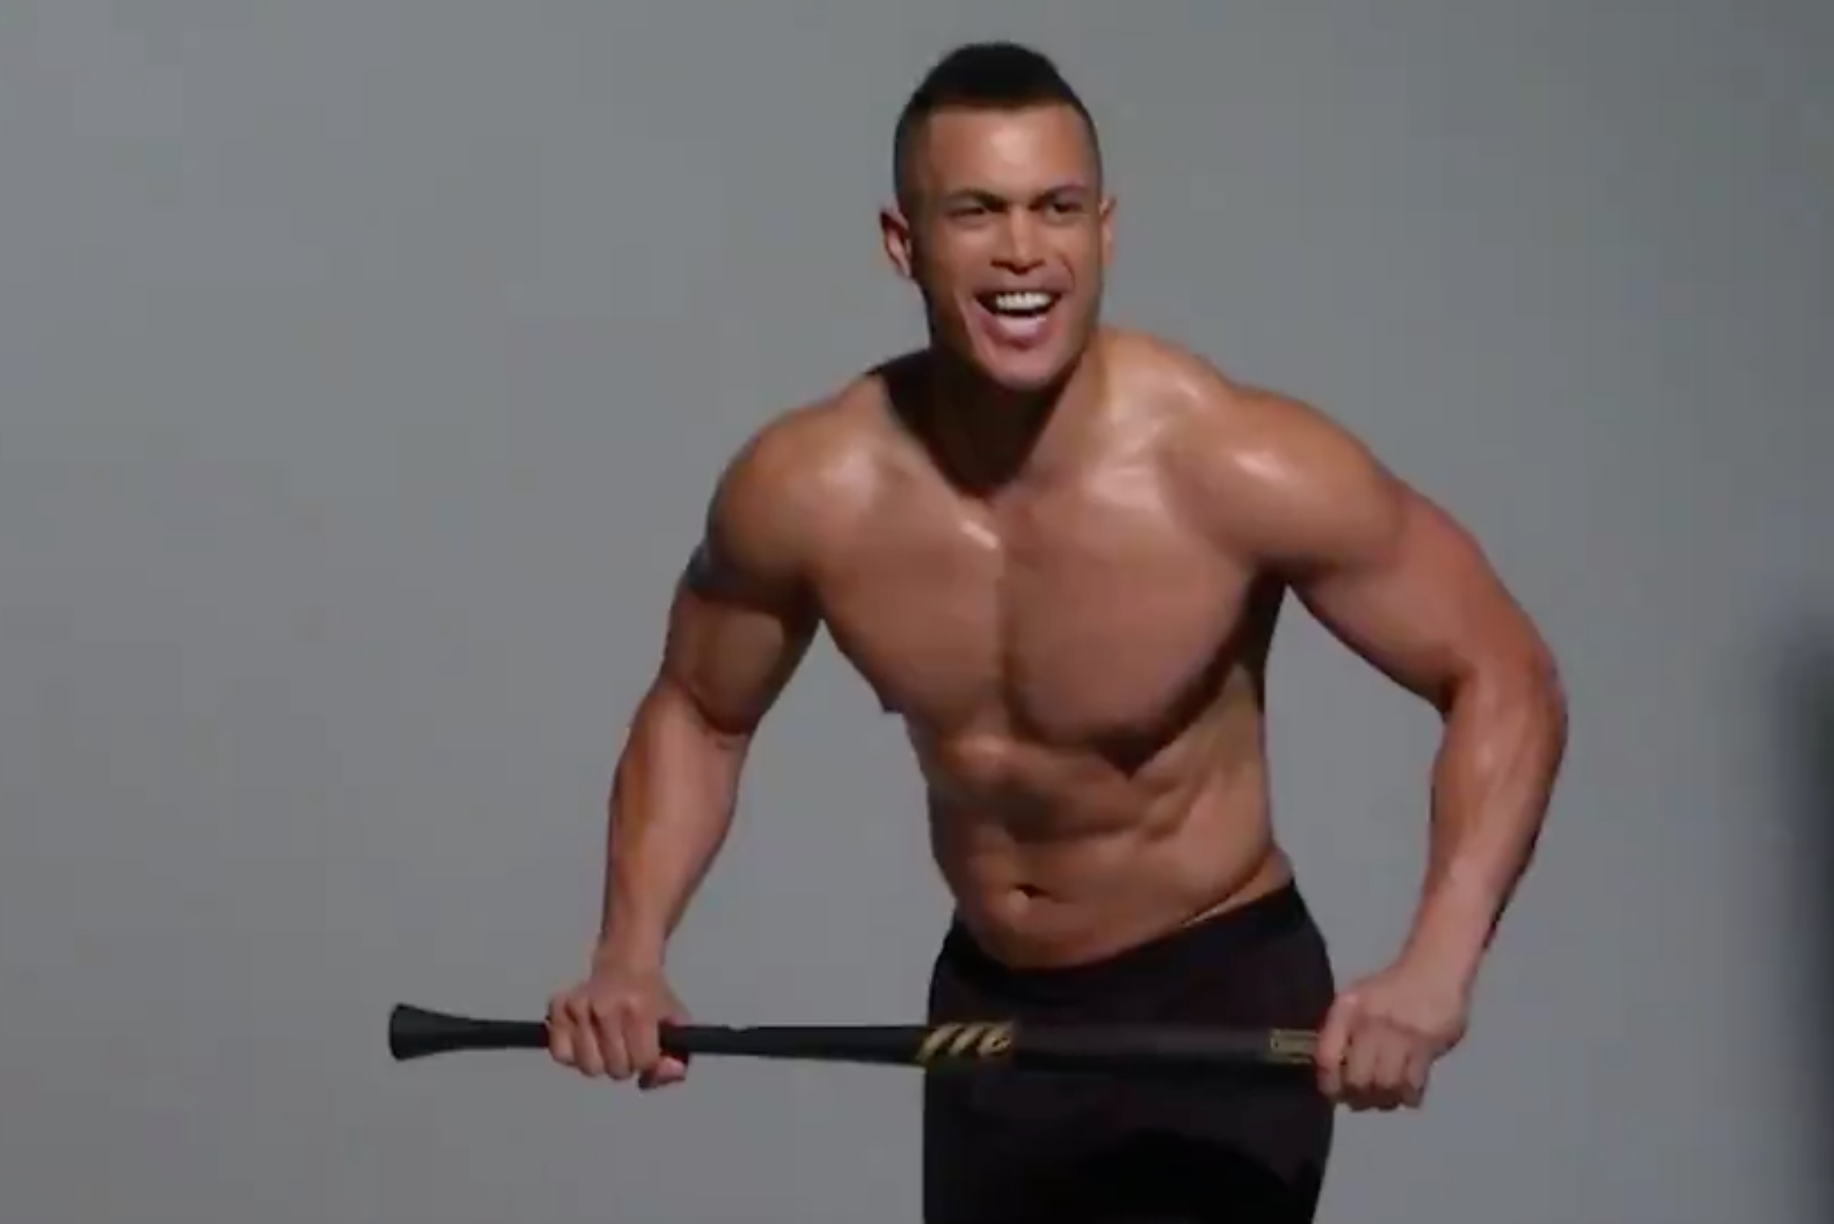 Giancarlo Stanton shows how ripped he is in Men's Health photo shoot